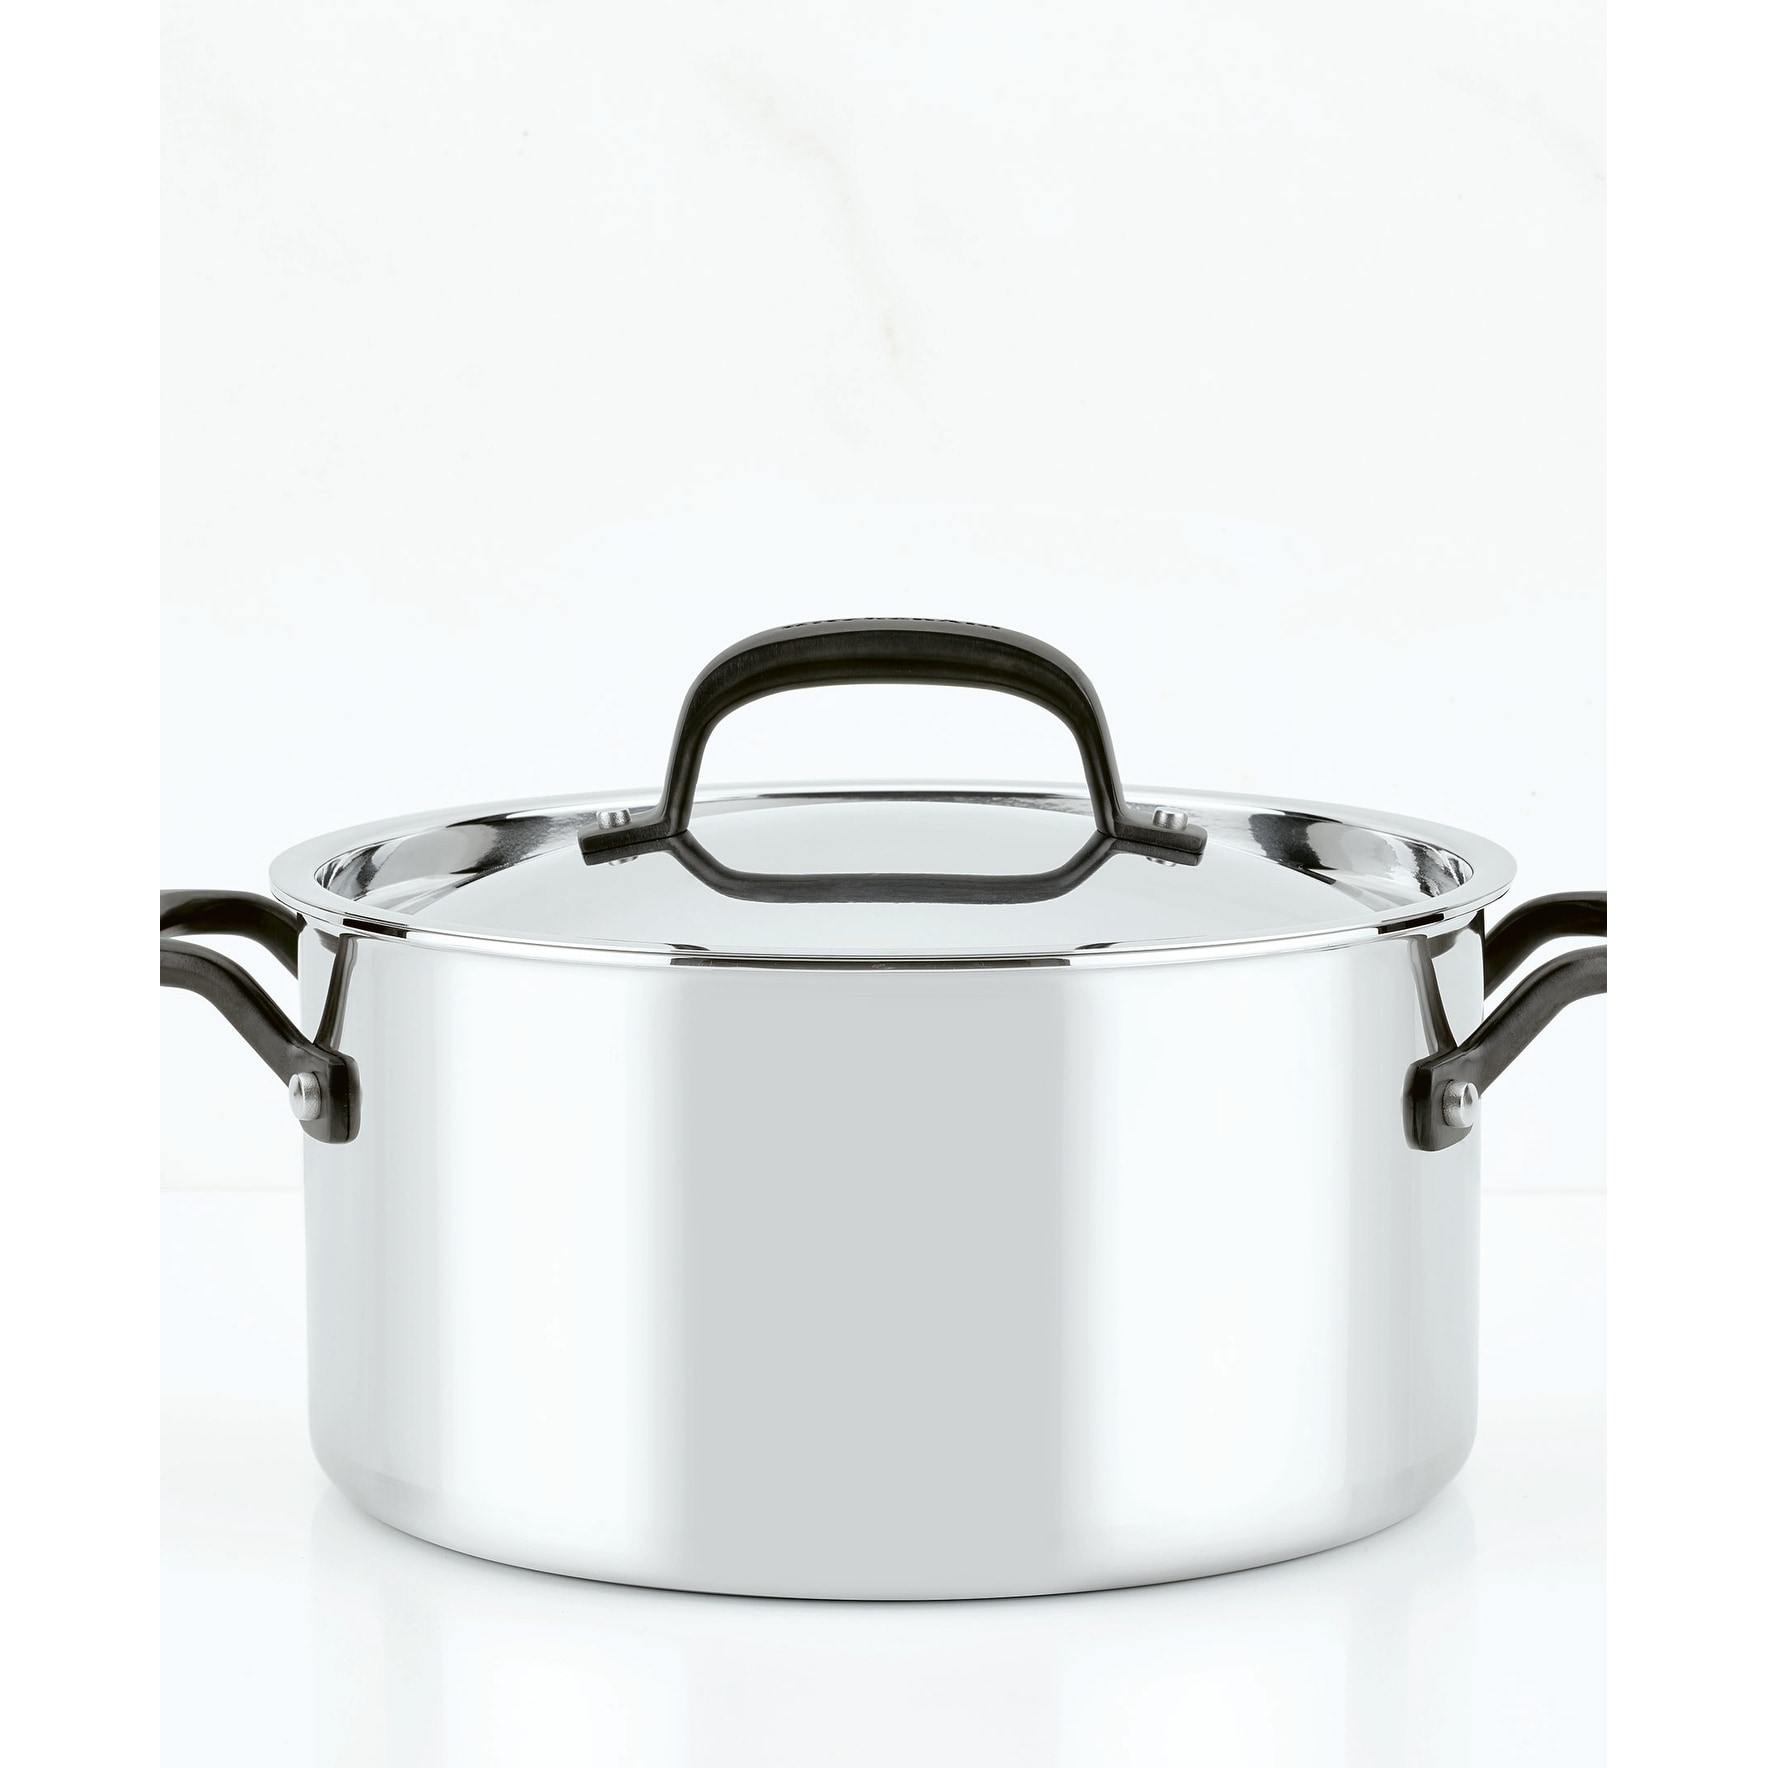 KitchenAid 5-Ply Clad Polished 10 Piece Stainless Steel Cookware Pots